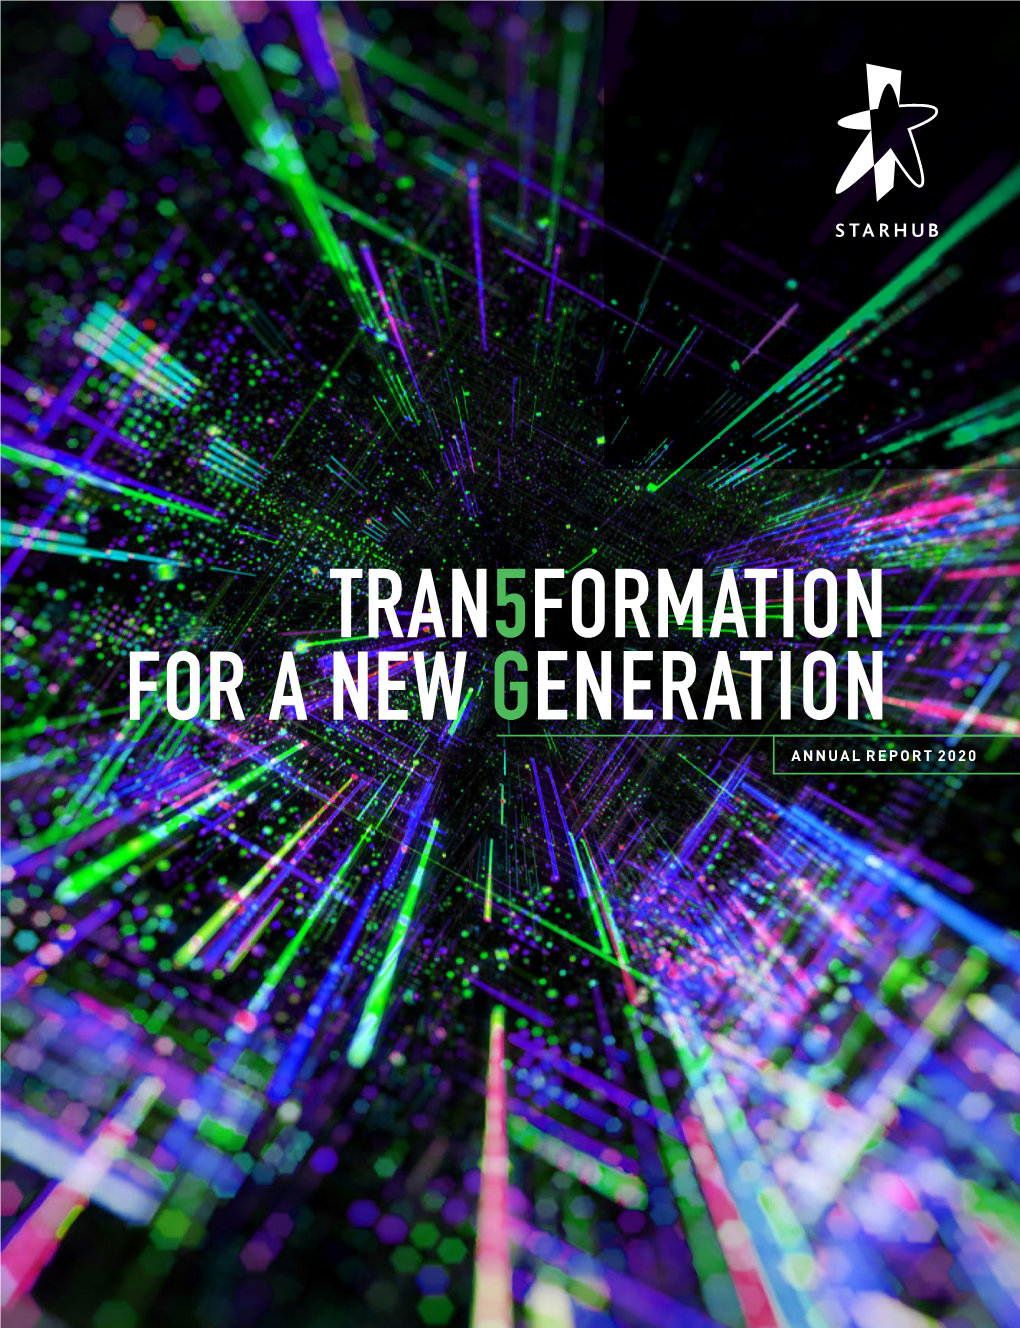 TRAN5FORMATION for a NEW GENERATION ANNUAL REPORT 2020 TRAN5FORMATION for a NEW GENERATION the World Is Changing As Global Economies Evolve at an Accelerated Pace